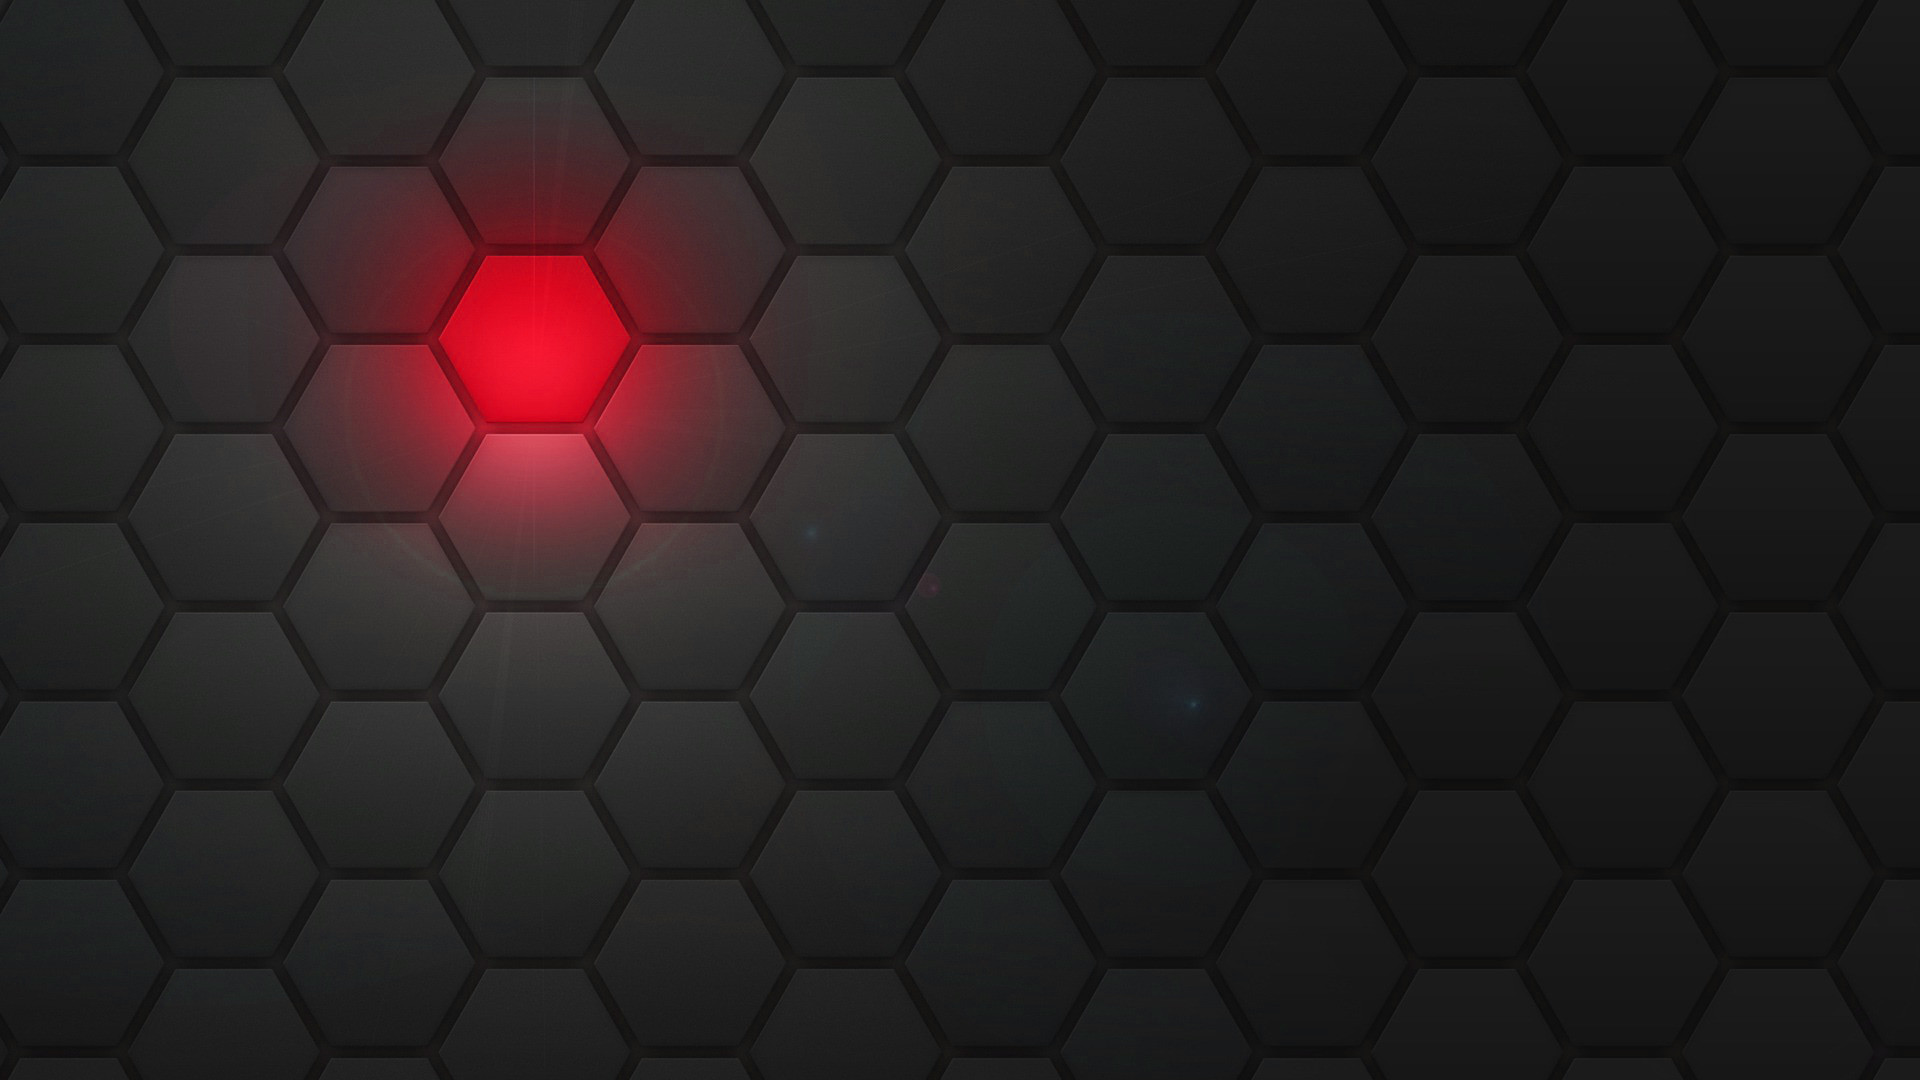 1920x1080 ... Background black and red hexagon Full HD Wallpaper and Background .